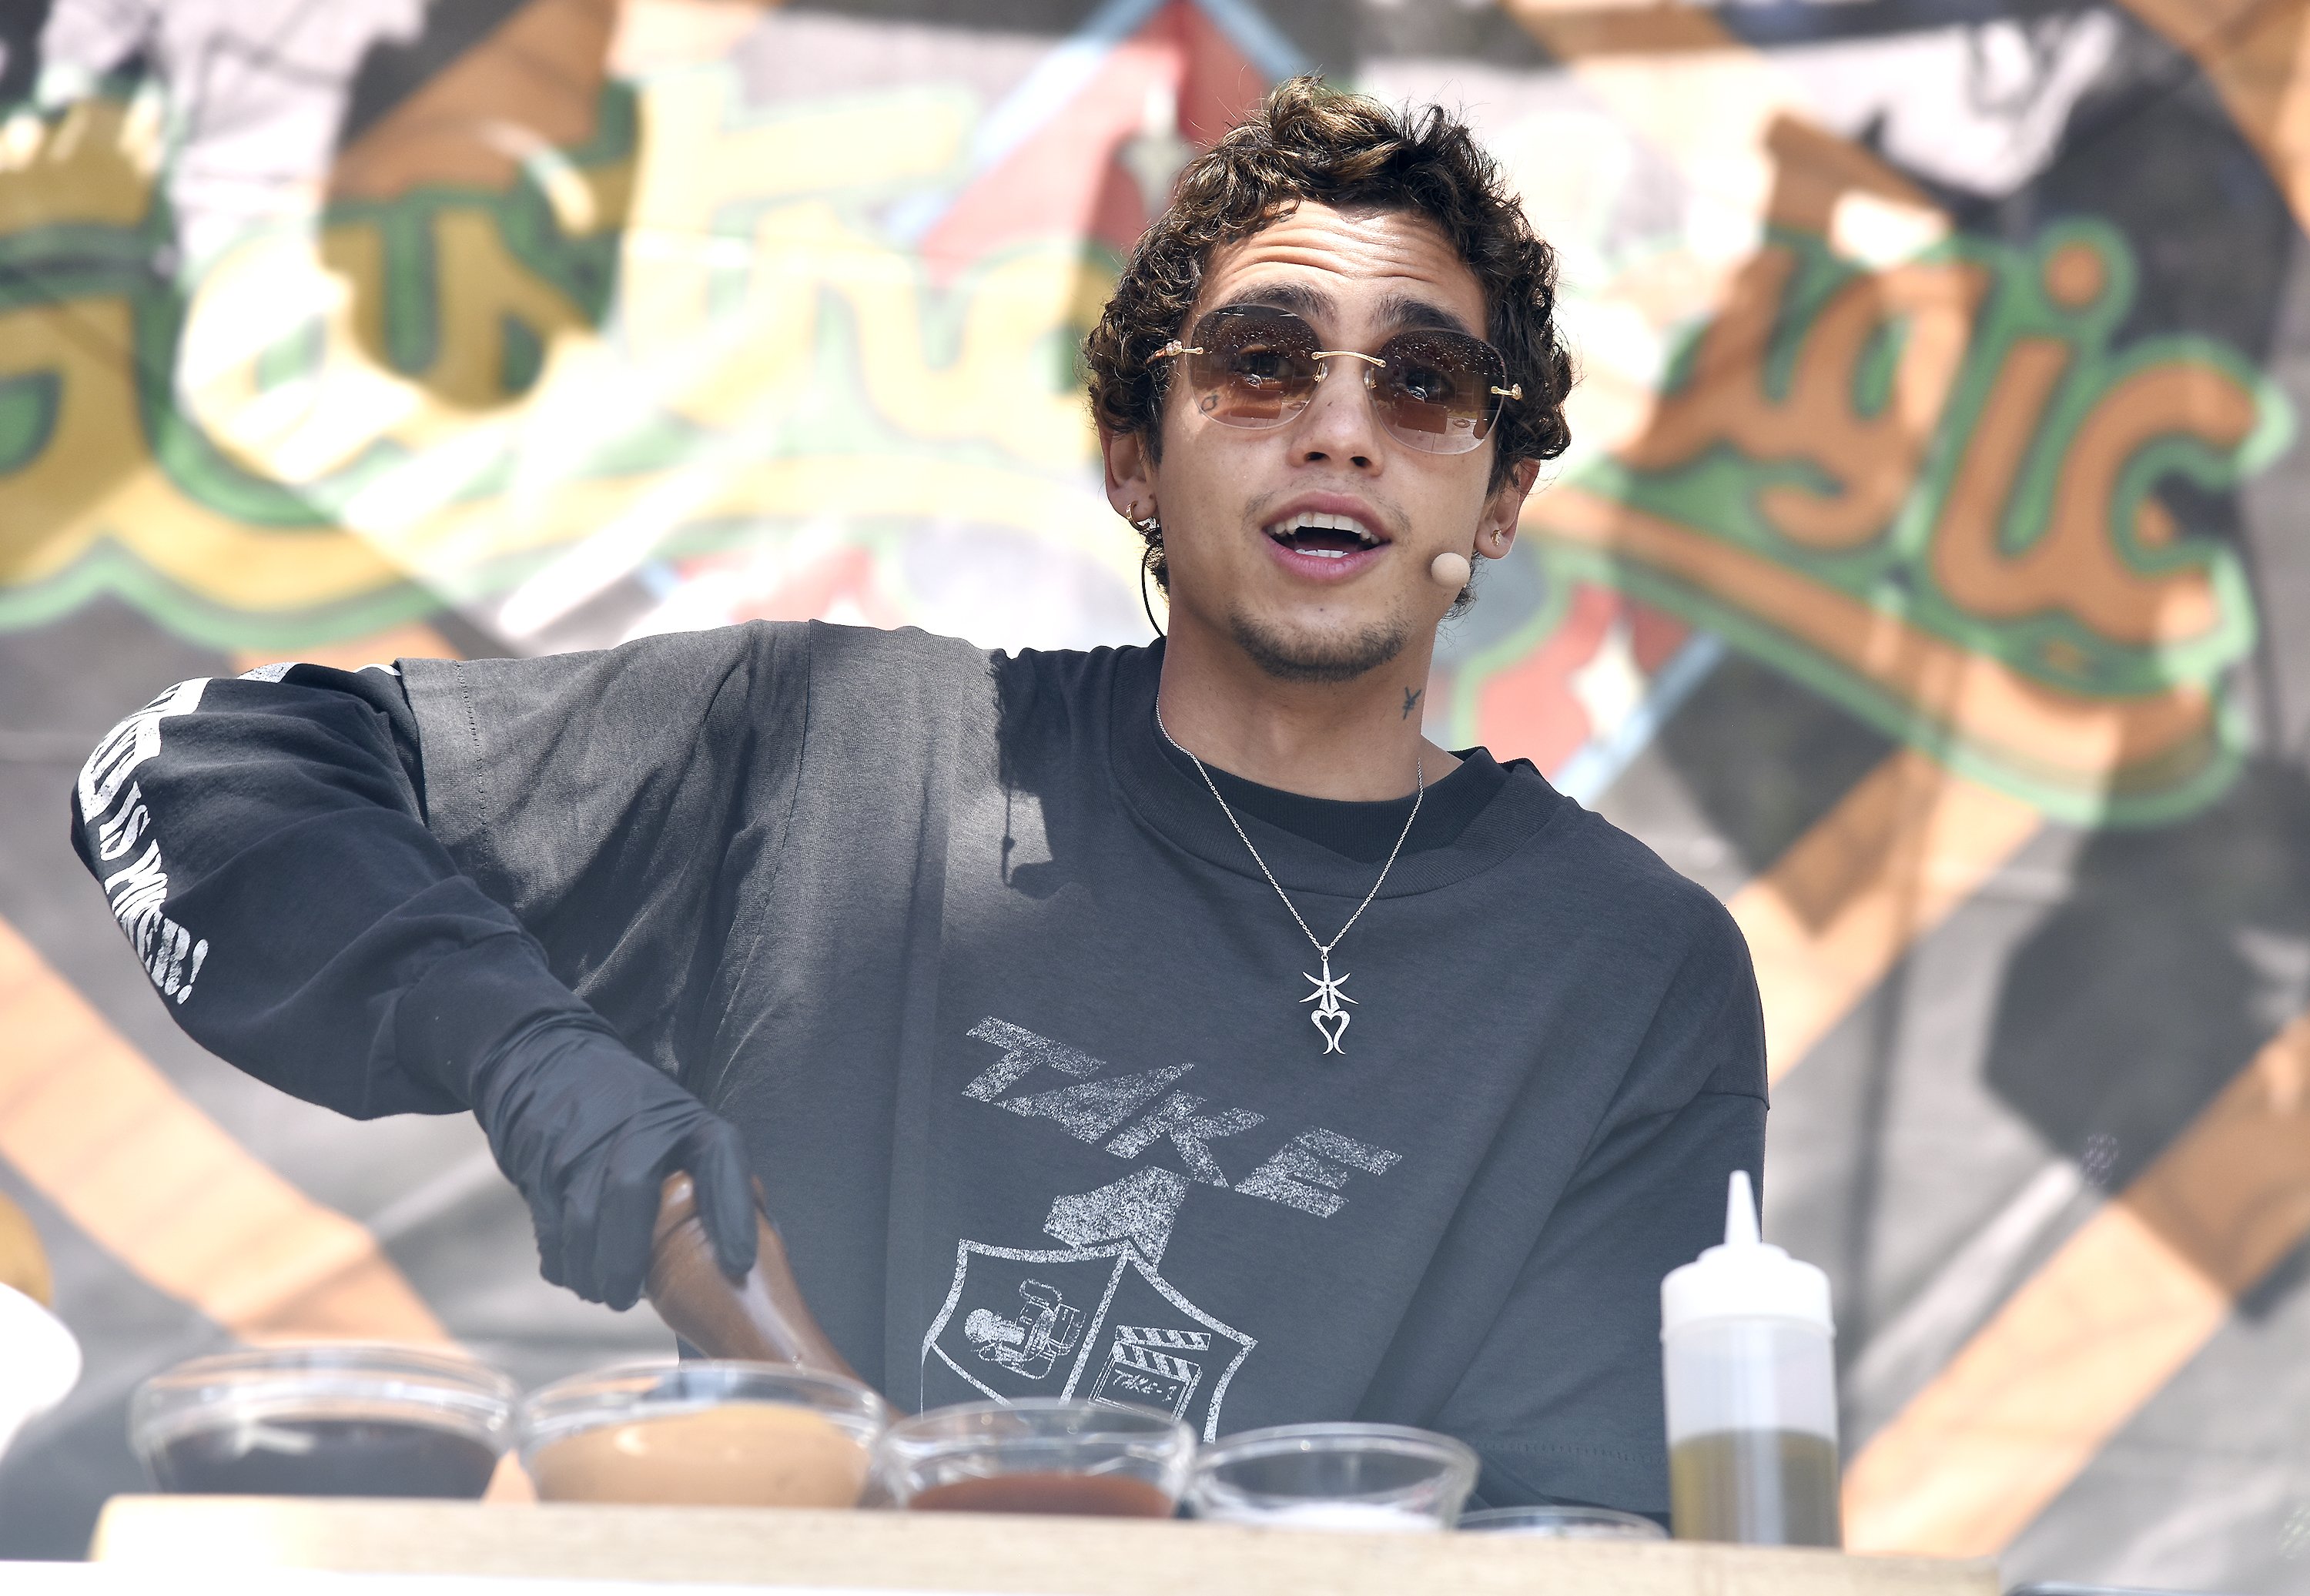 Dominic Fike at a culinary demonstration during the 2022 Outside Lands Music and Arts Festival in San Francisco | Source: Getty Images